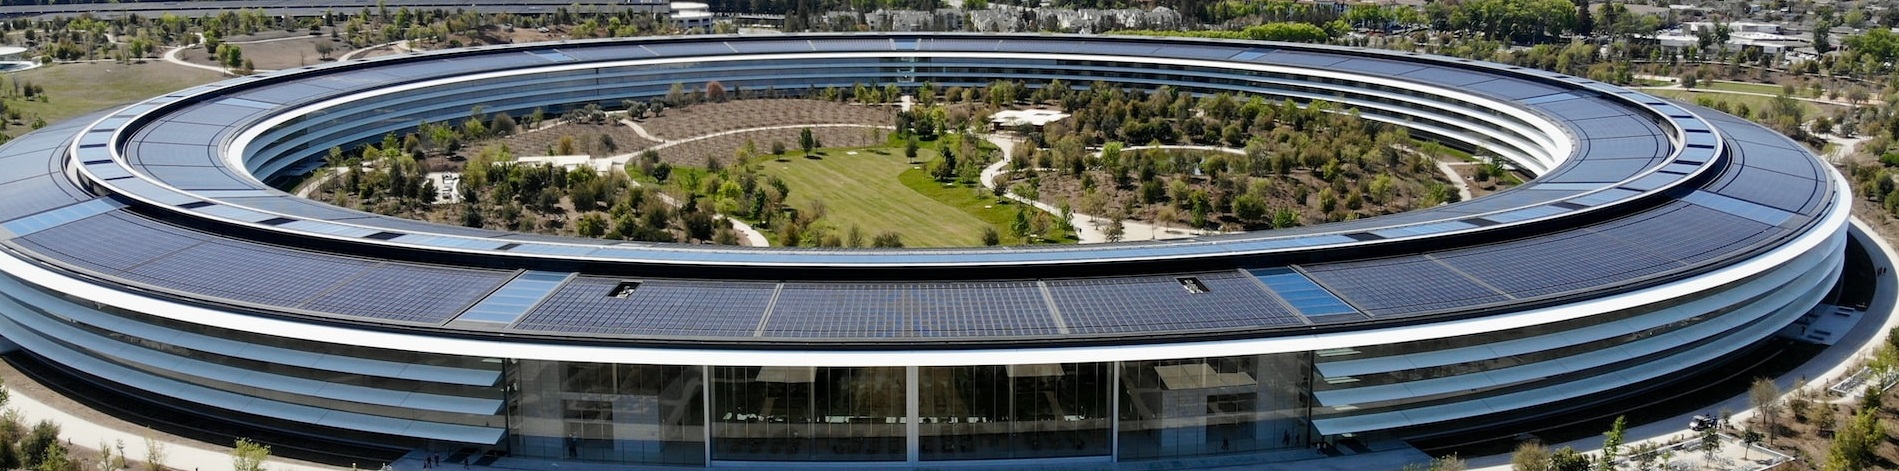 Apple park in Cupertino | Breast Cancer Car Donations